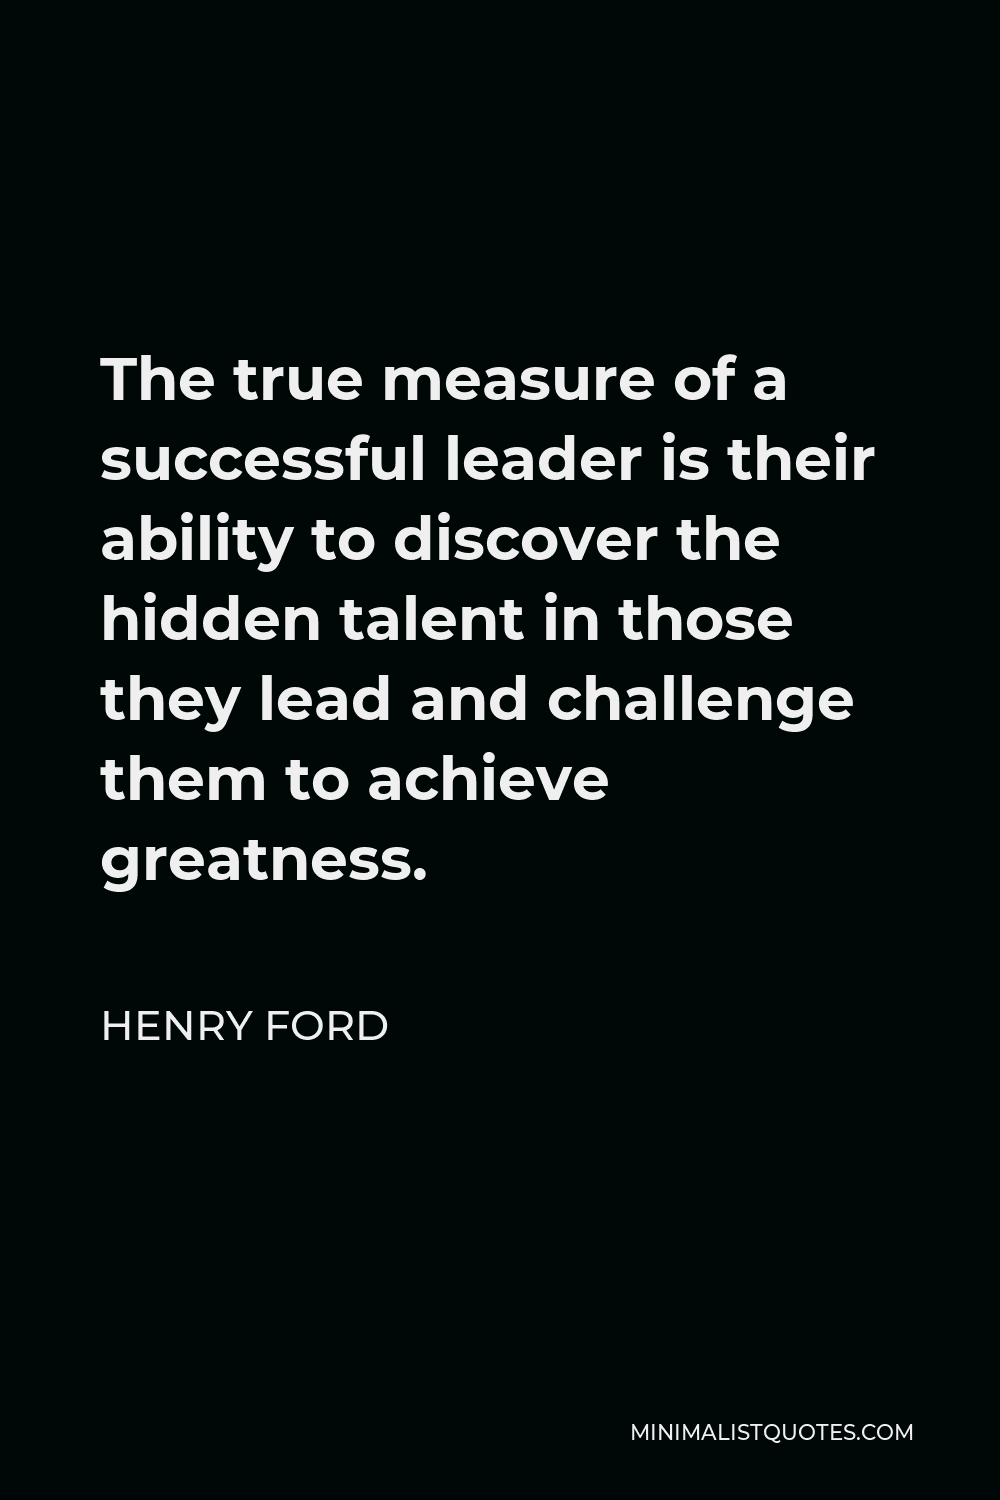 Henry Ford Quote The True Measure Of A Successful Leader Is Their Ability To Discover The Hidden Talent In Those They Lead And Challenge Them To Achieve Greatness